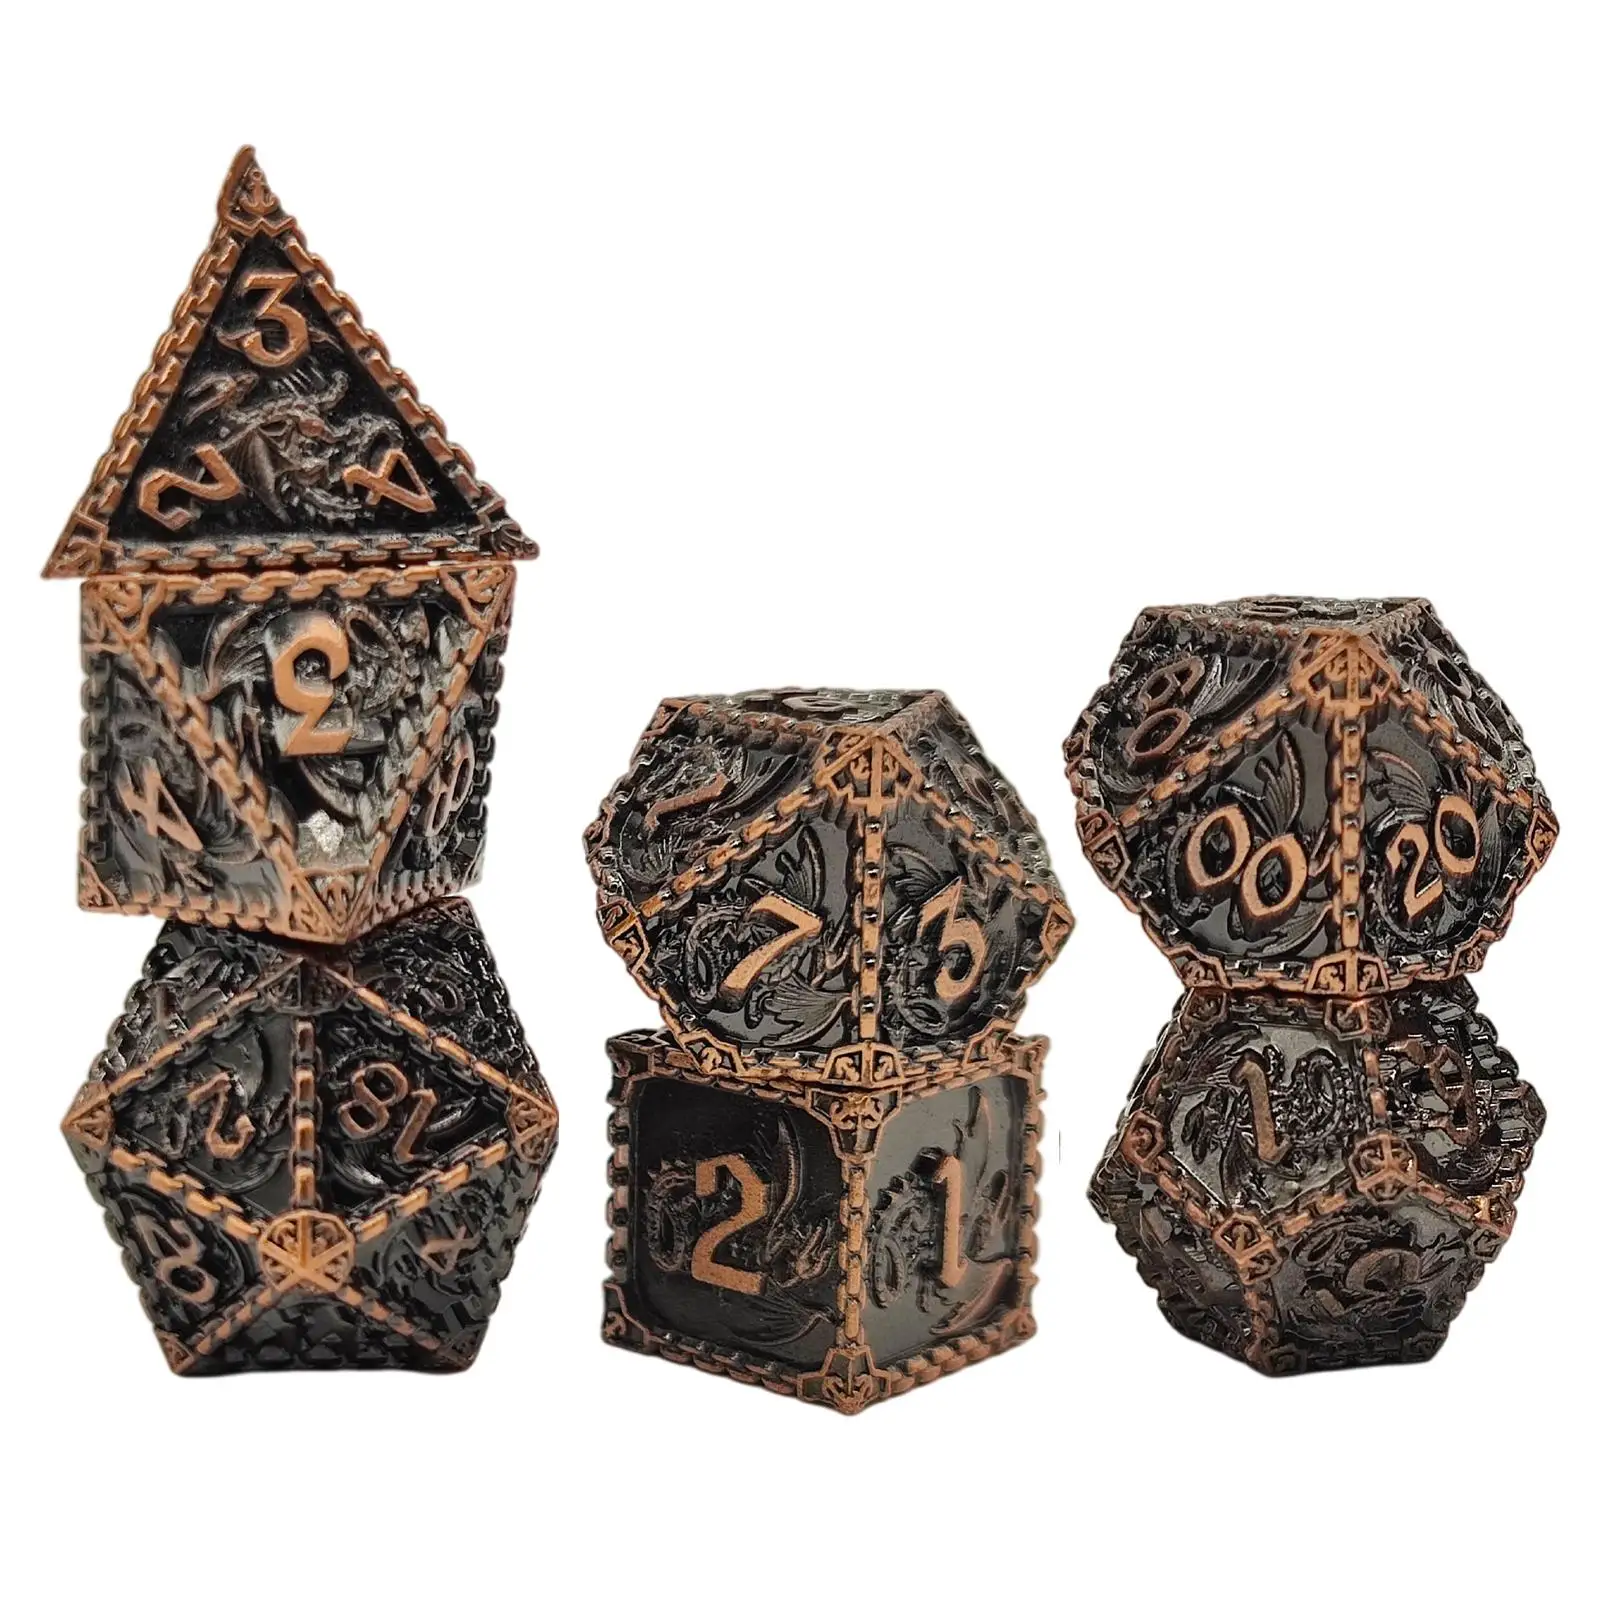 7 Pieces Polyhedral Dice Multi-Sided Props Board Games Party Favors RPG Dices Party Supply Role Playing Dice for DND RPG MTG